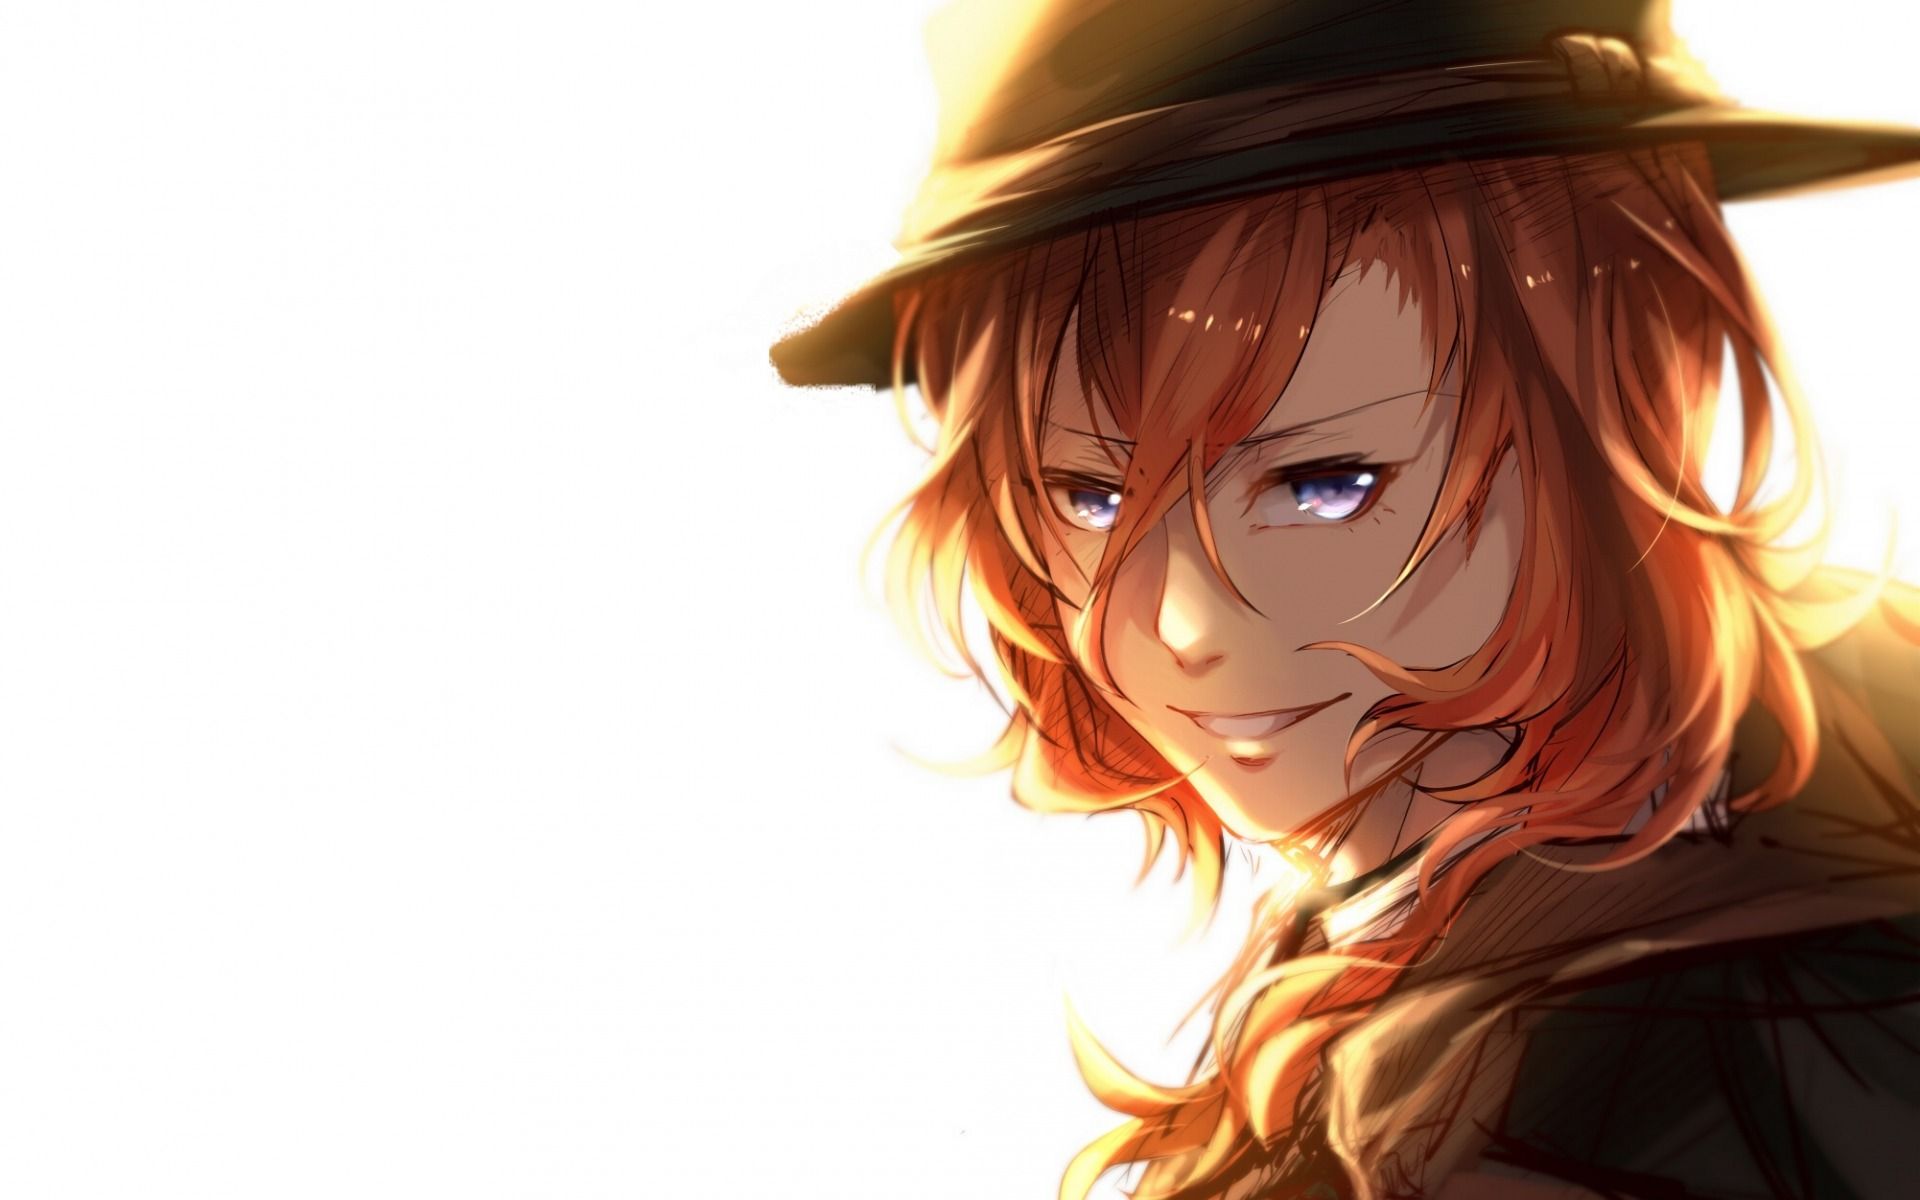 Download wallpaper Bungou Stray Dogs, Nakahara Chuuya, Bungostraydogs, Port Mafia, anime characters, art, portrait, japanese manga for desktop with resolution 1920x1200. High Quality HD picture wallpaper